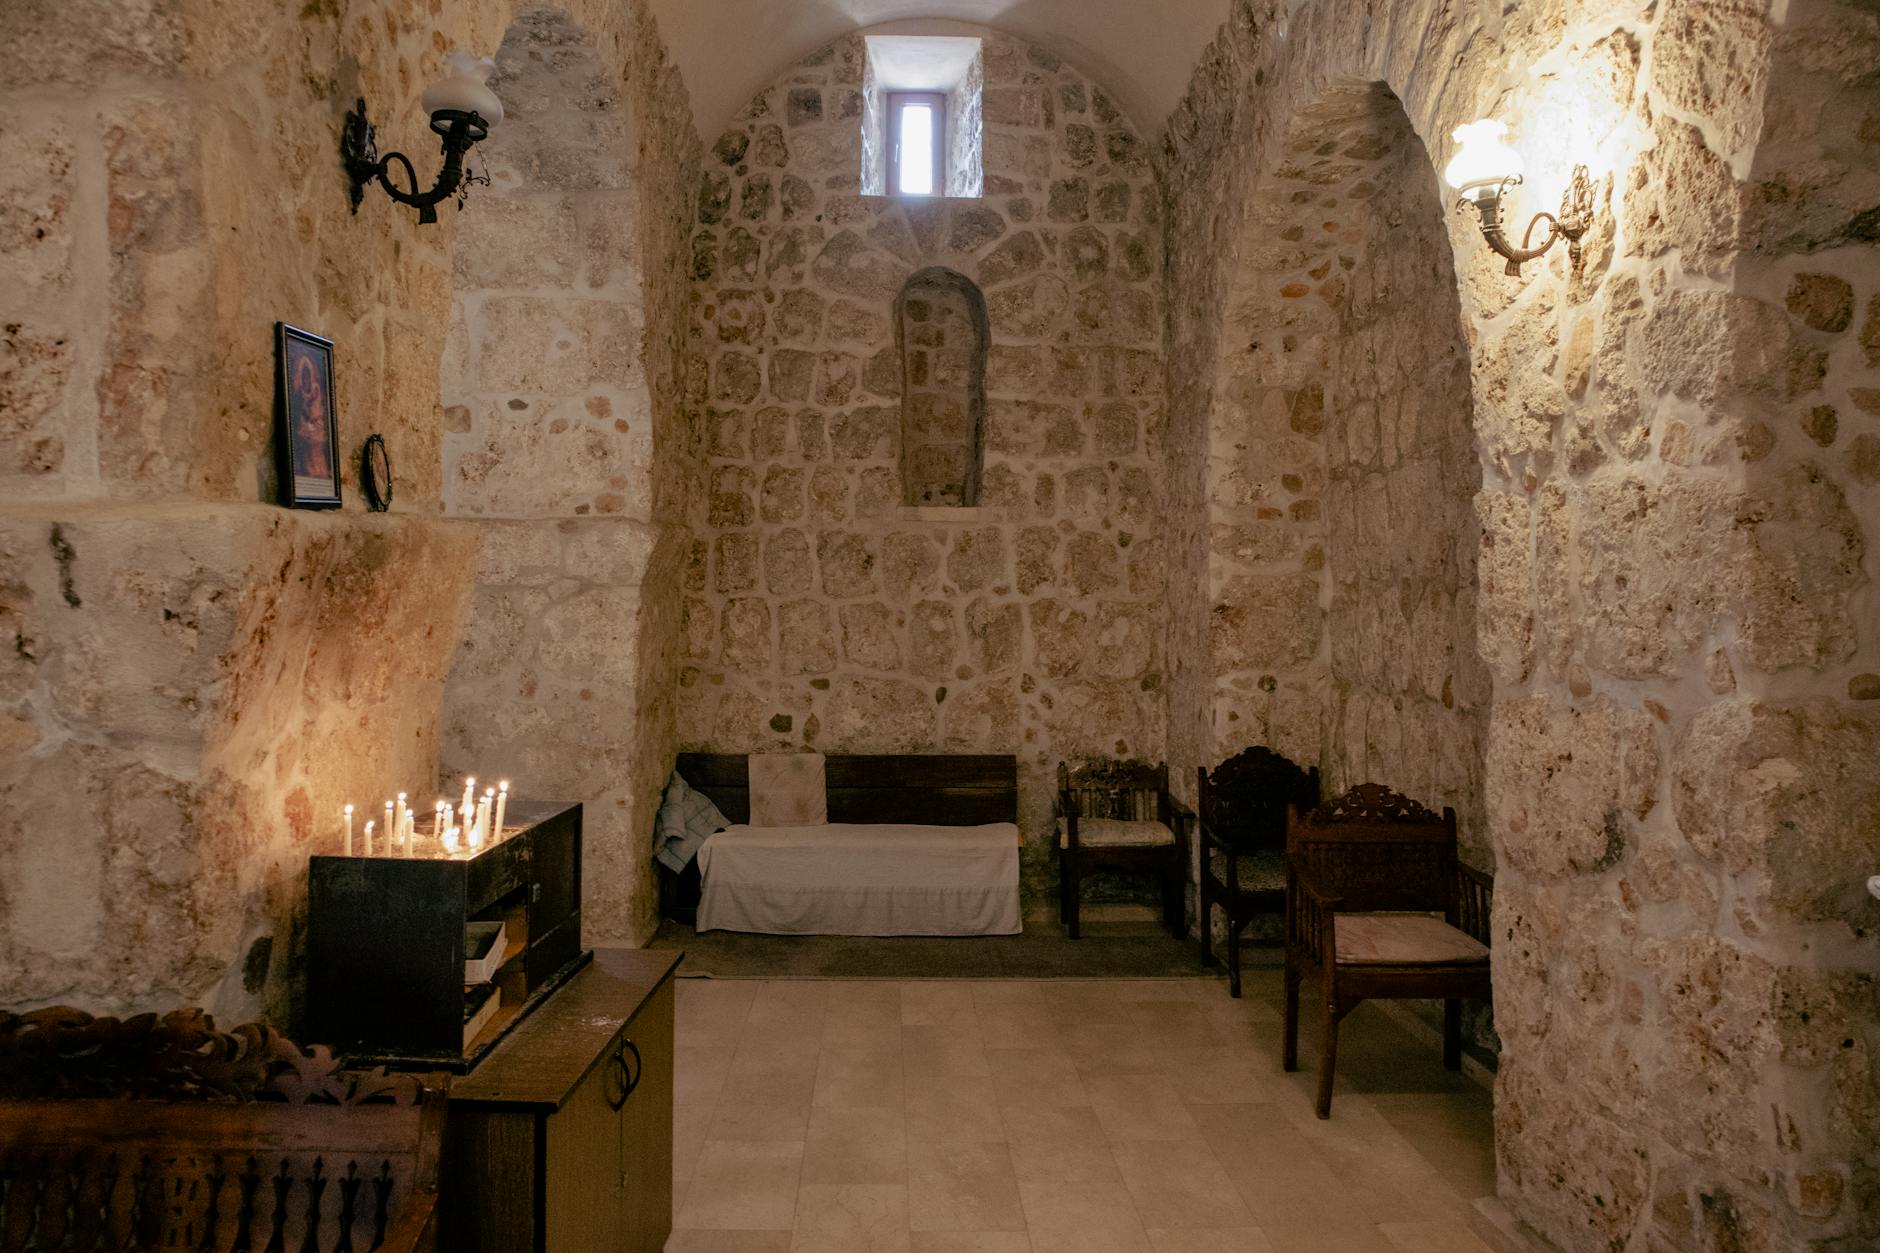 ascetic monastery room with arched stone walls